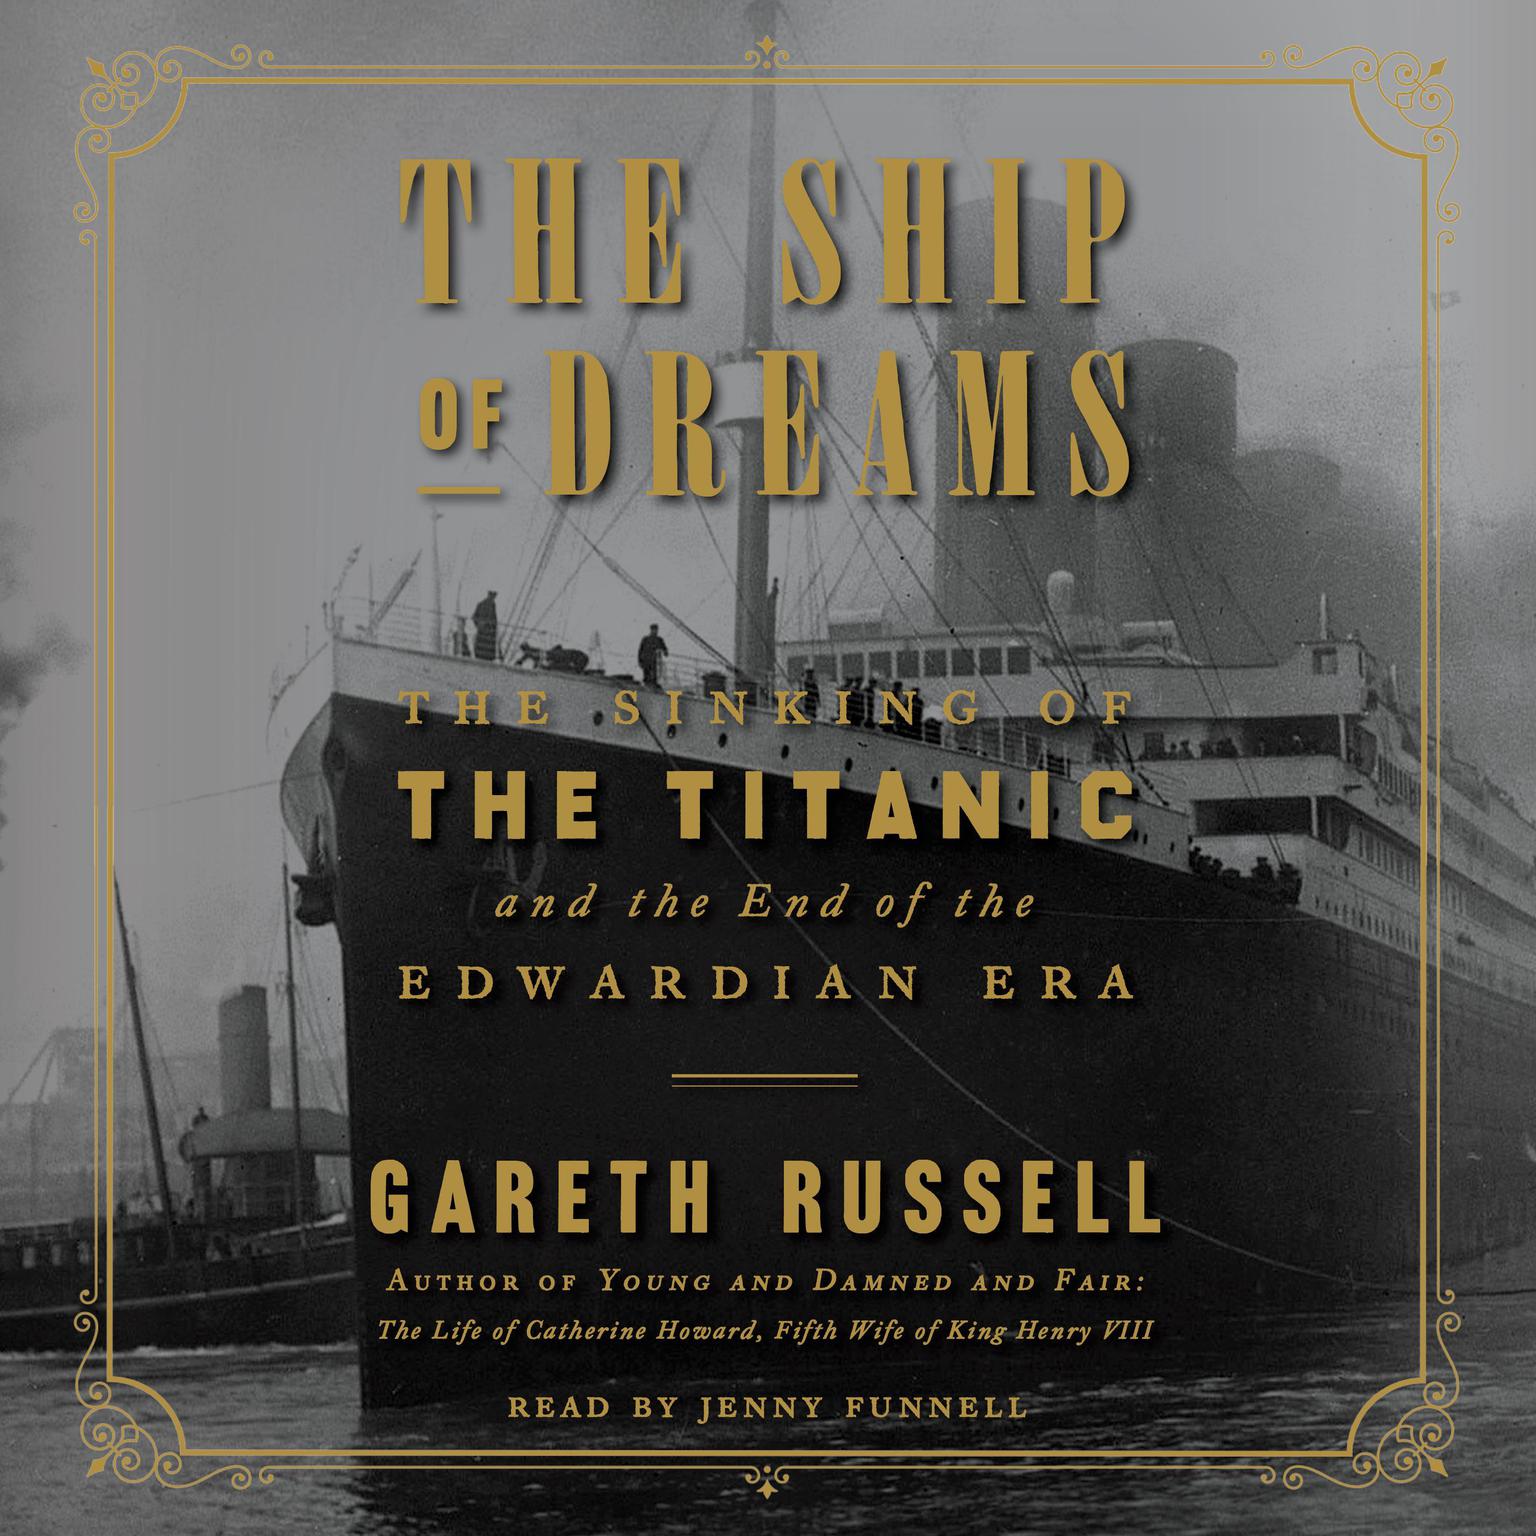 The Ship of Dreams: The Sinking of the Titanic and the End of the Edwardian Era Audiobook, by Gareth Russell